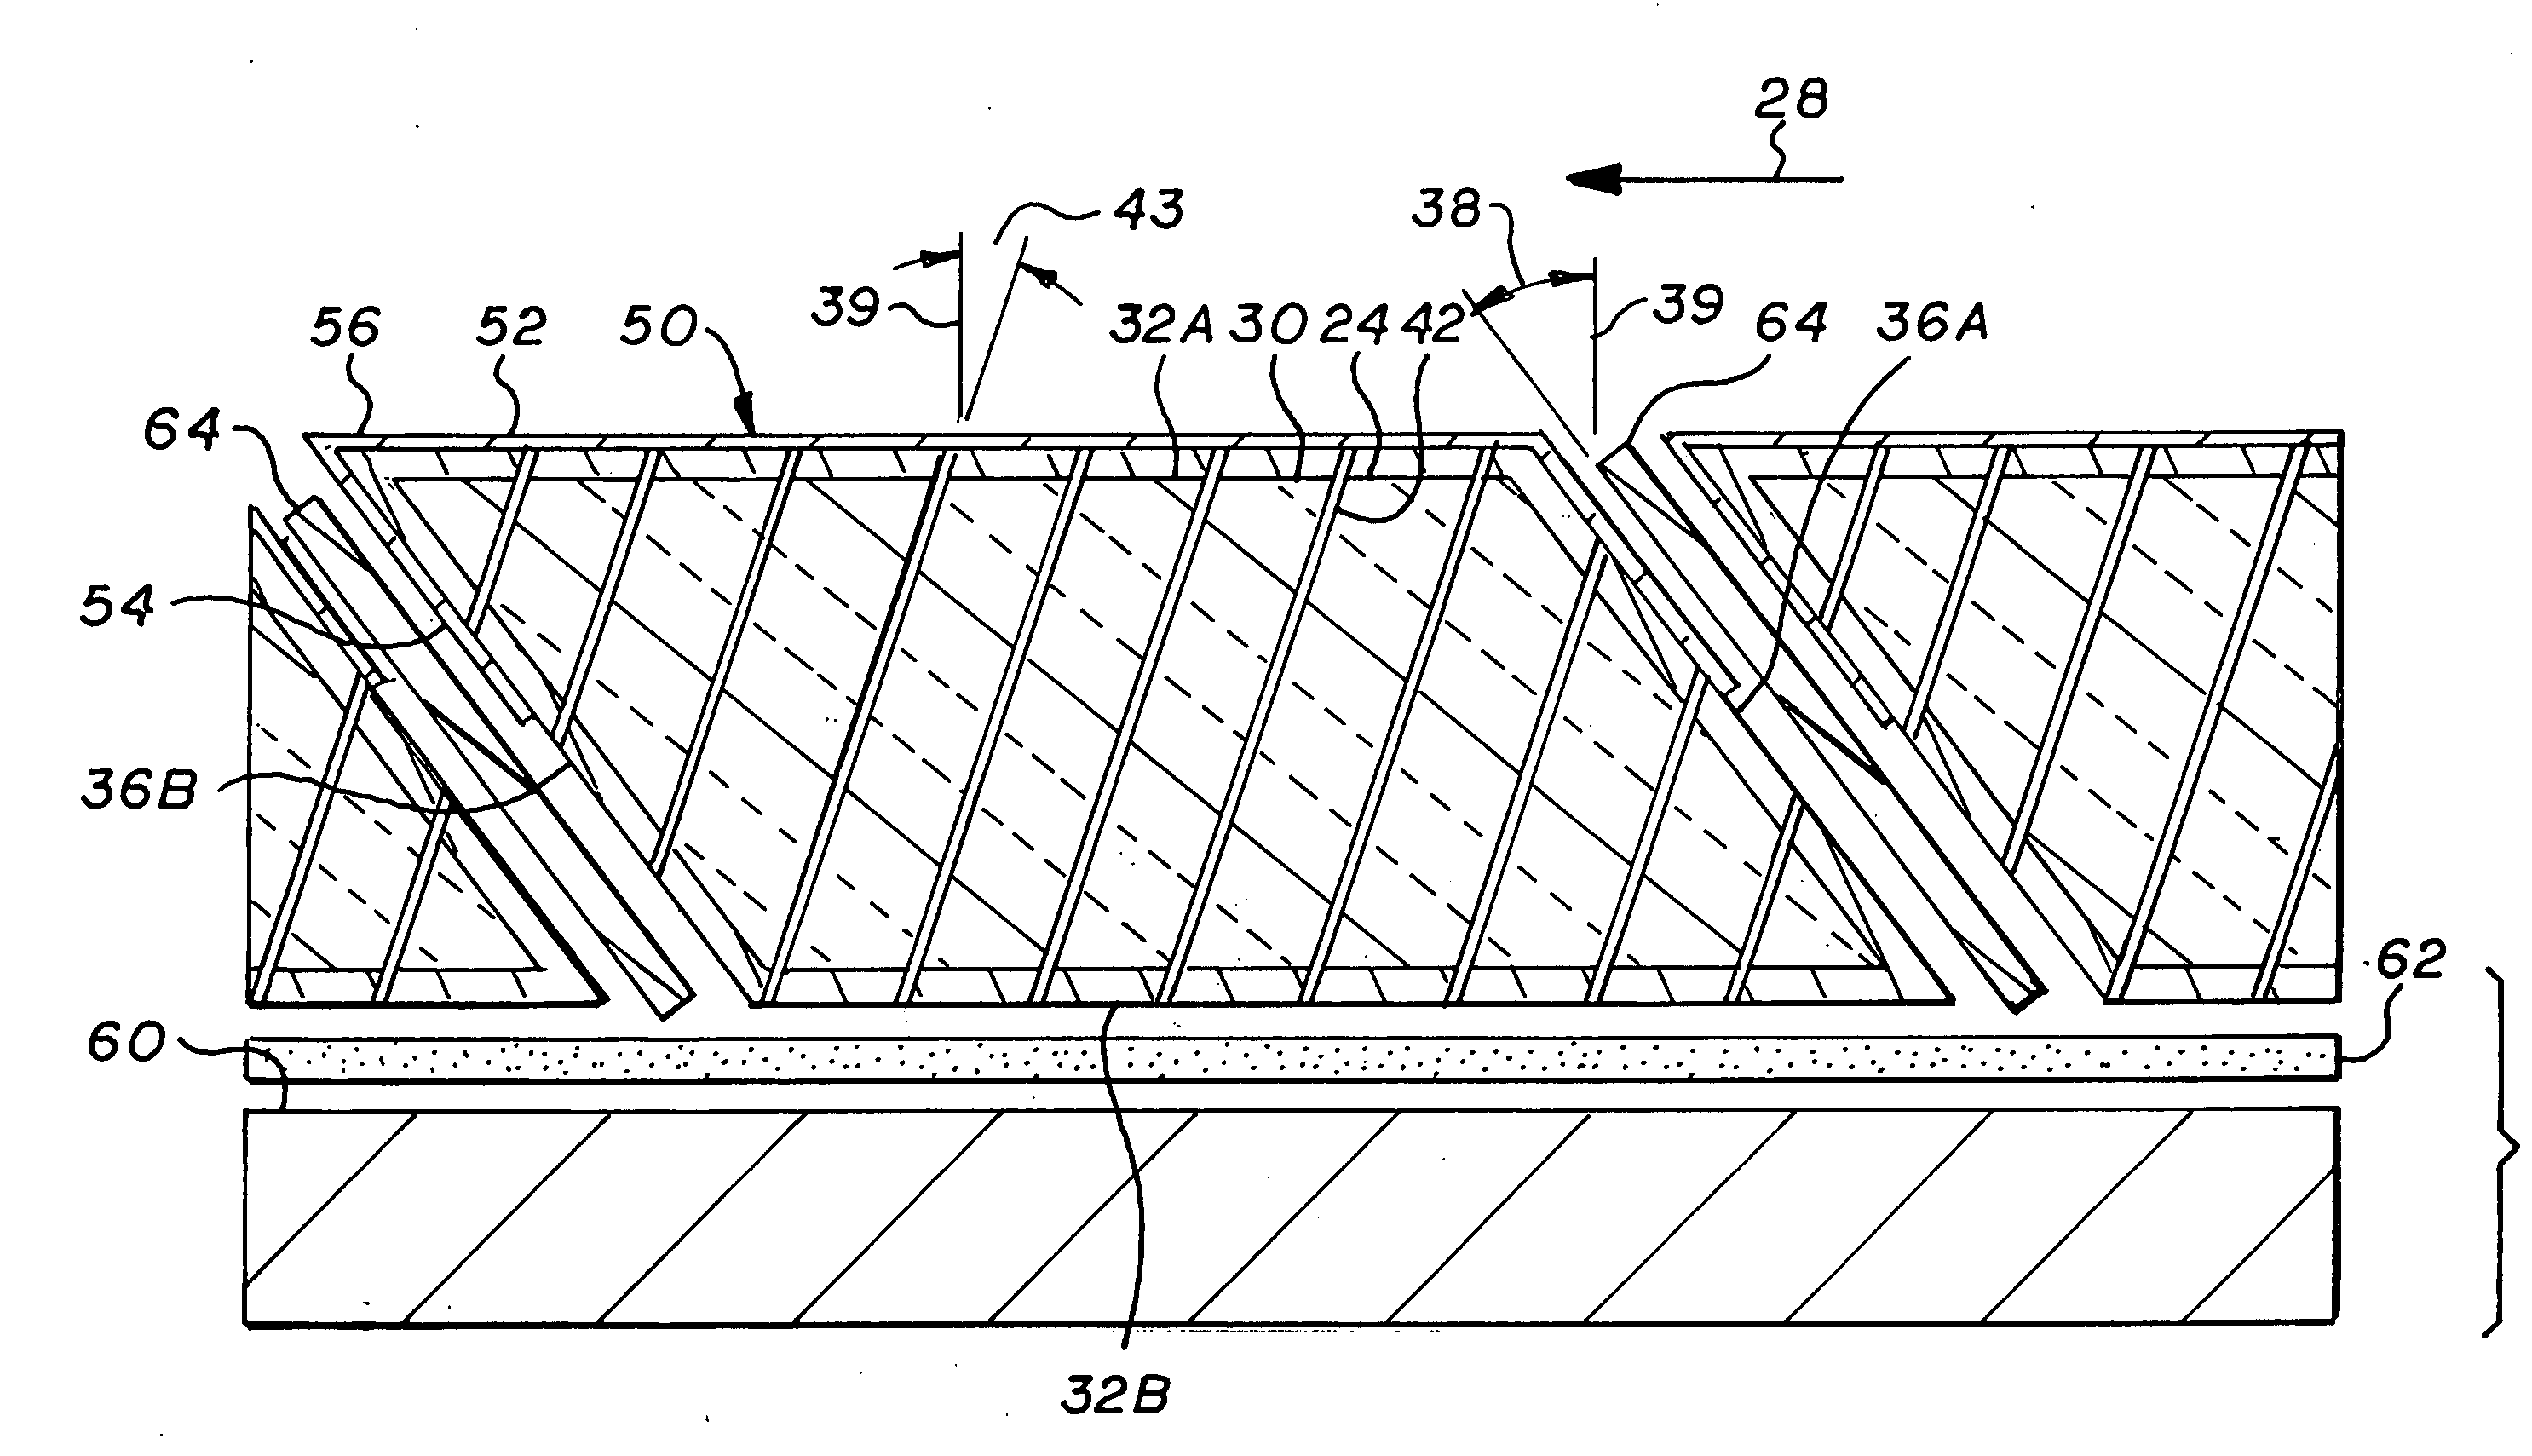 Thermal protection system for a vehicle